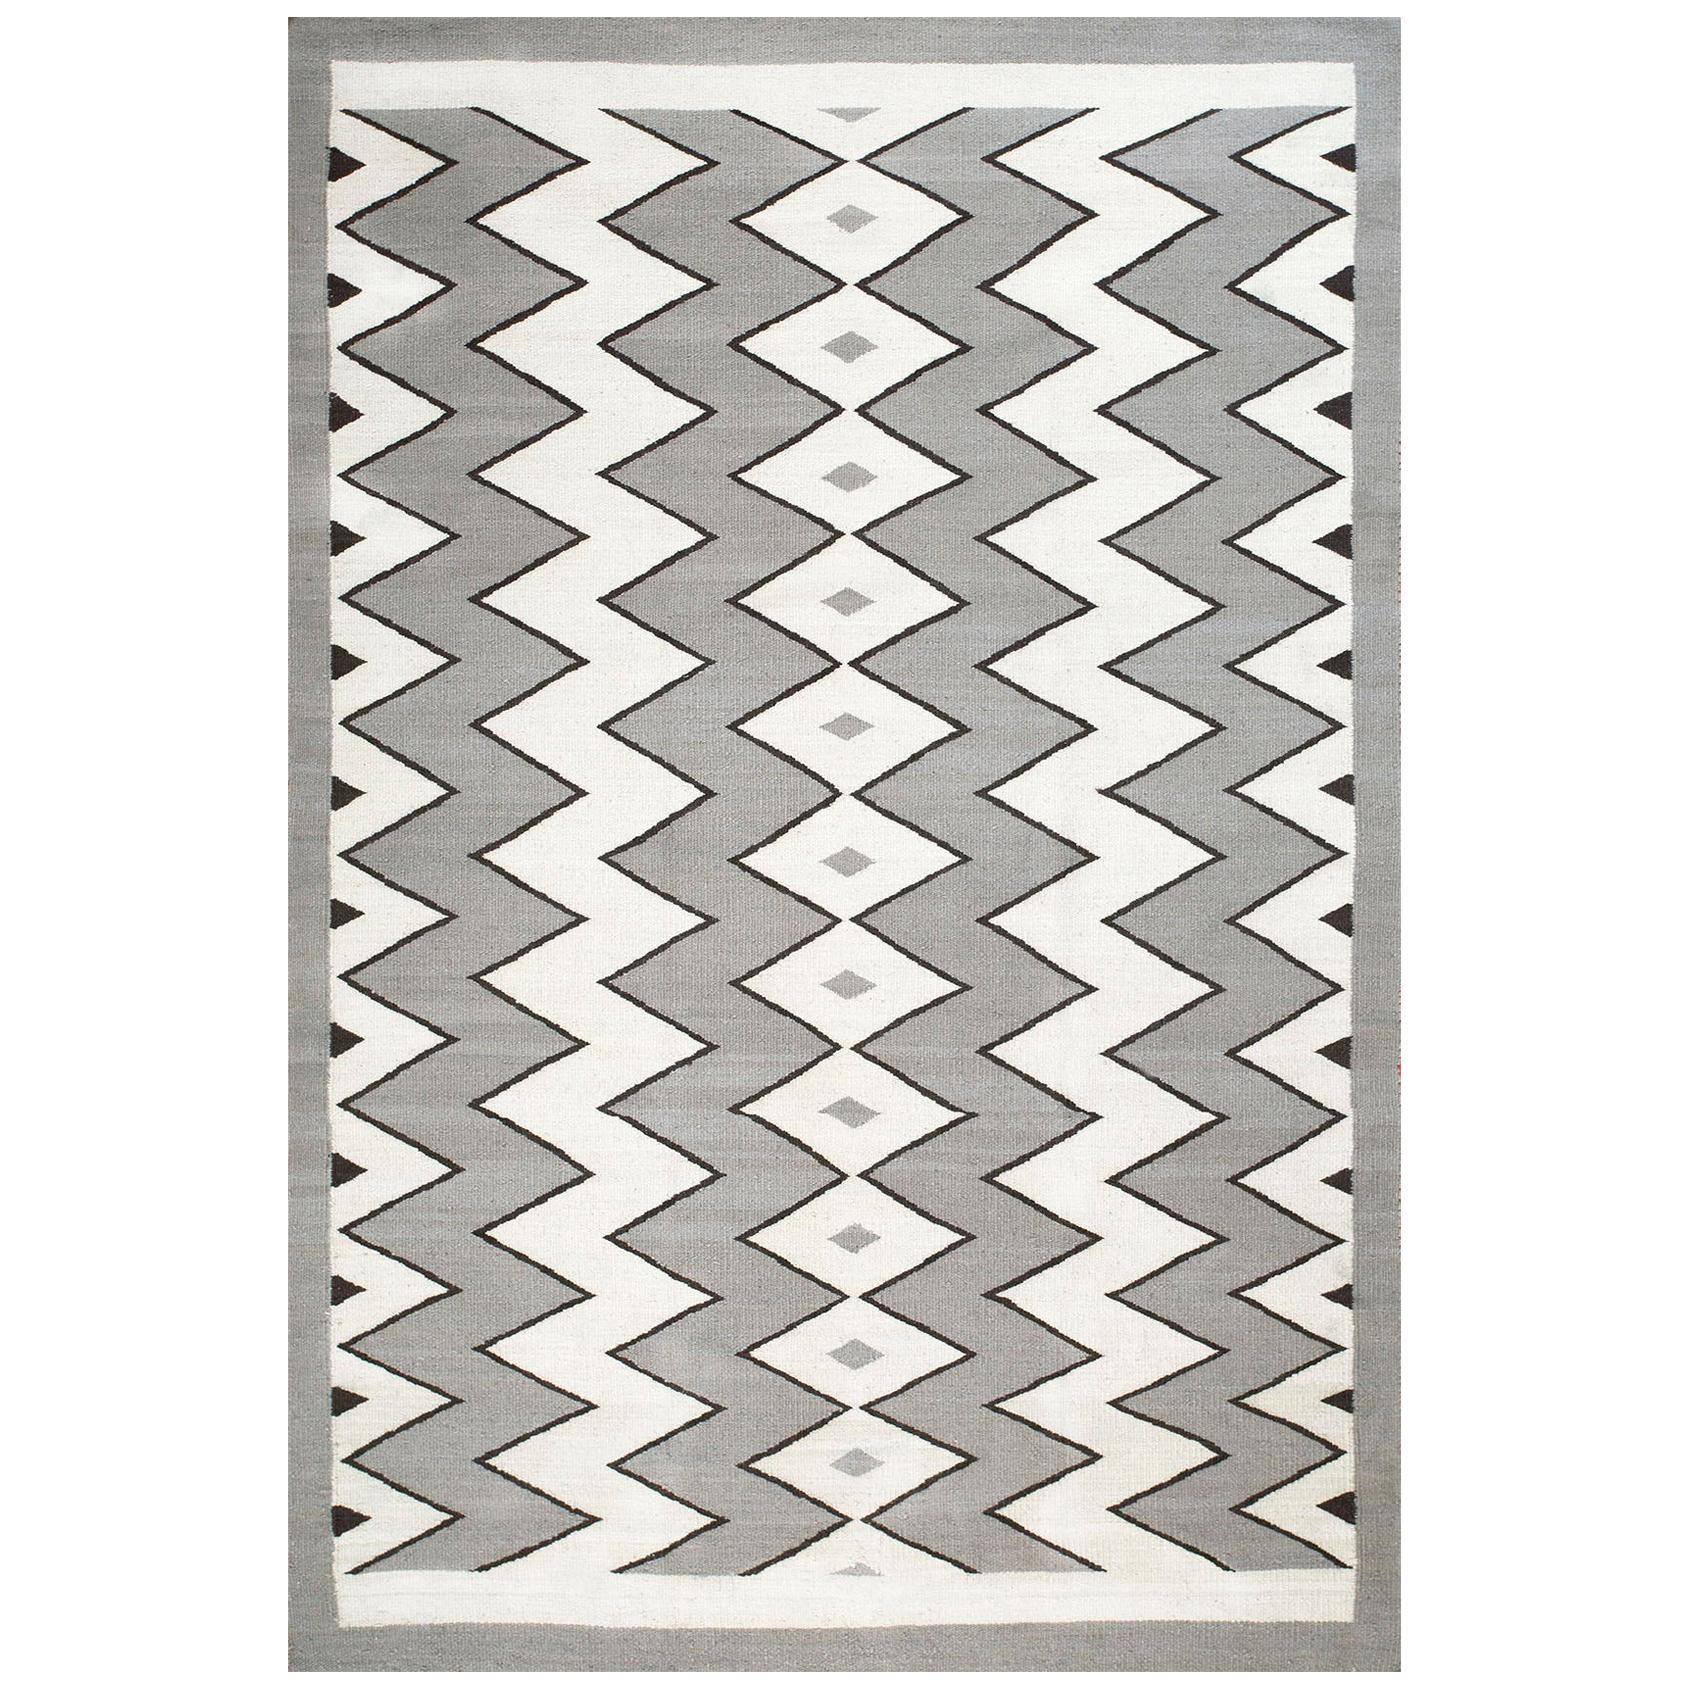 Contemporary Navajo Style Carpet ( 6' x 9' - 183 x 274 ) For Sale